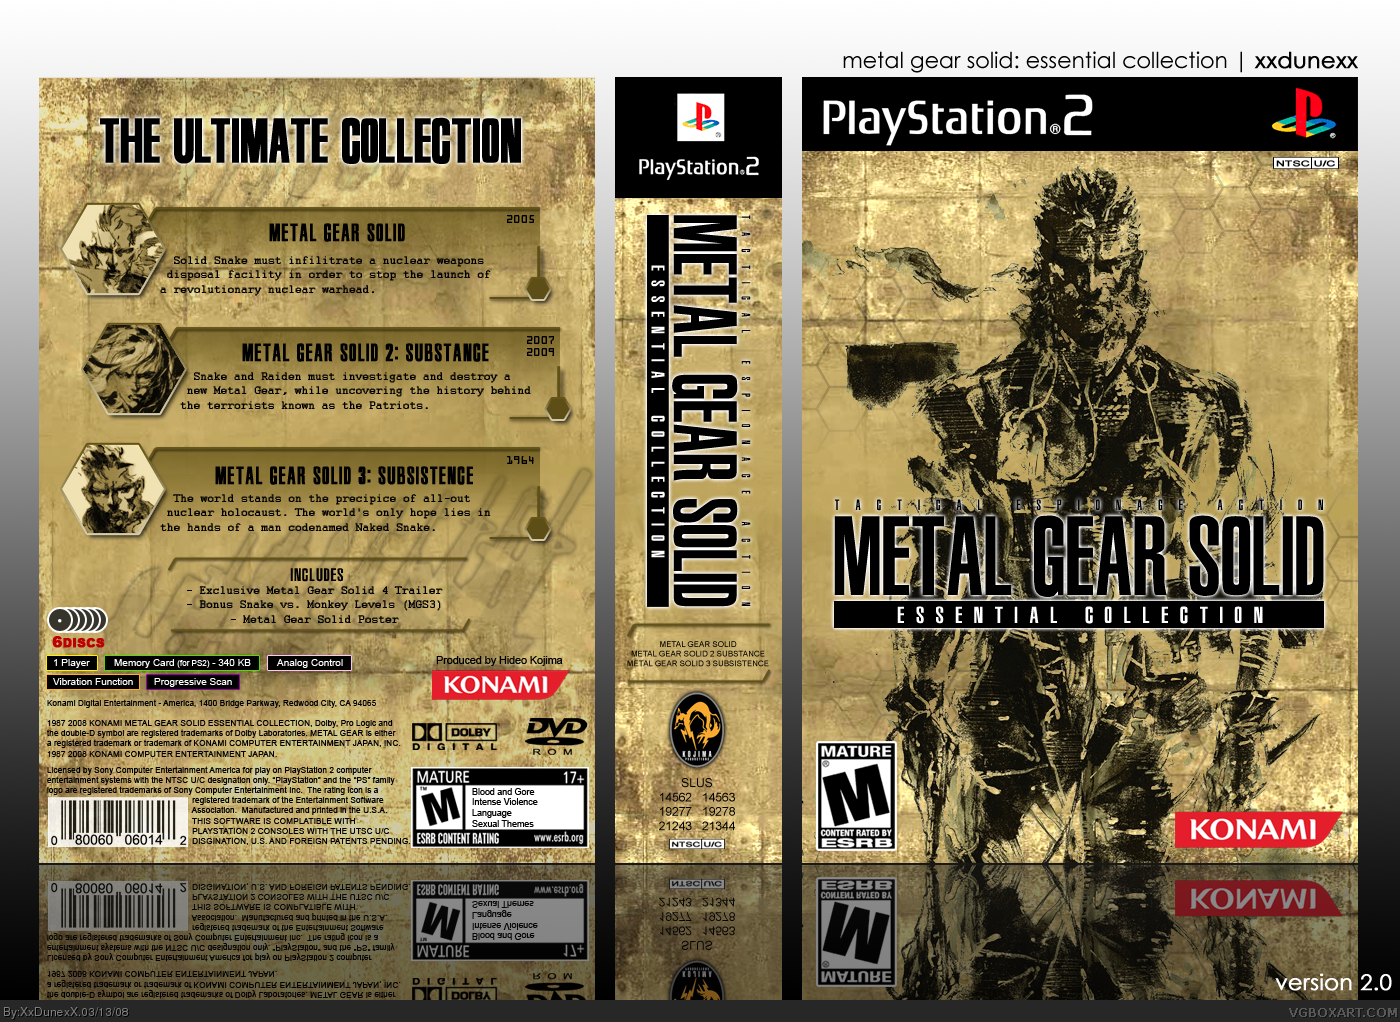 Metal Gear Solid: Essential Collection box cover